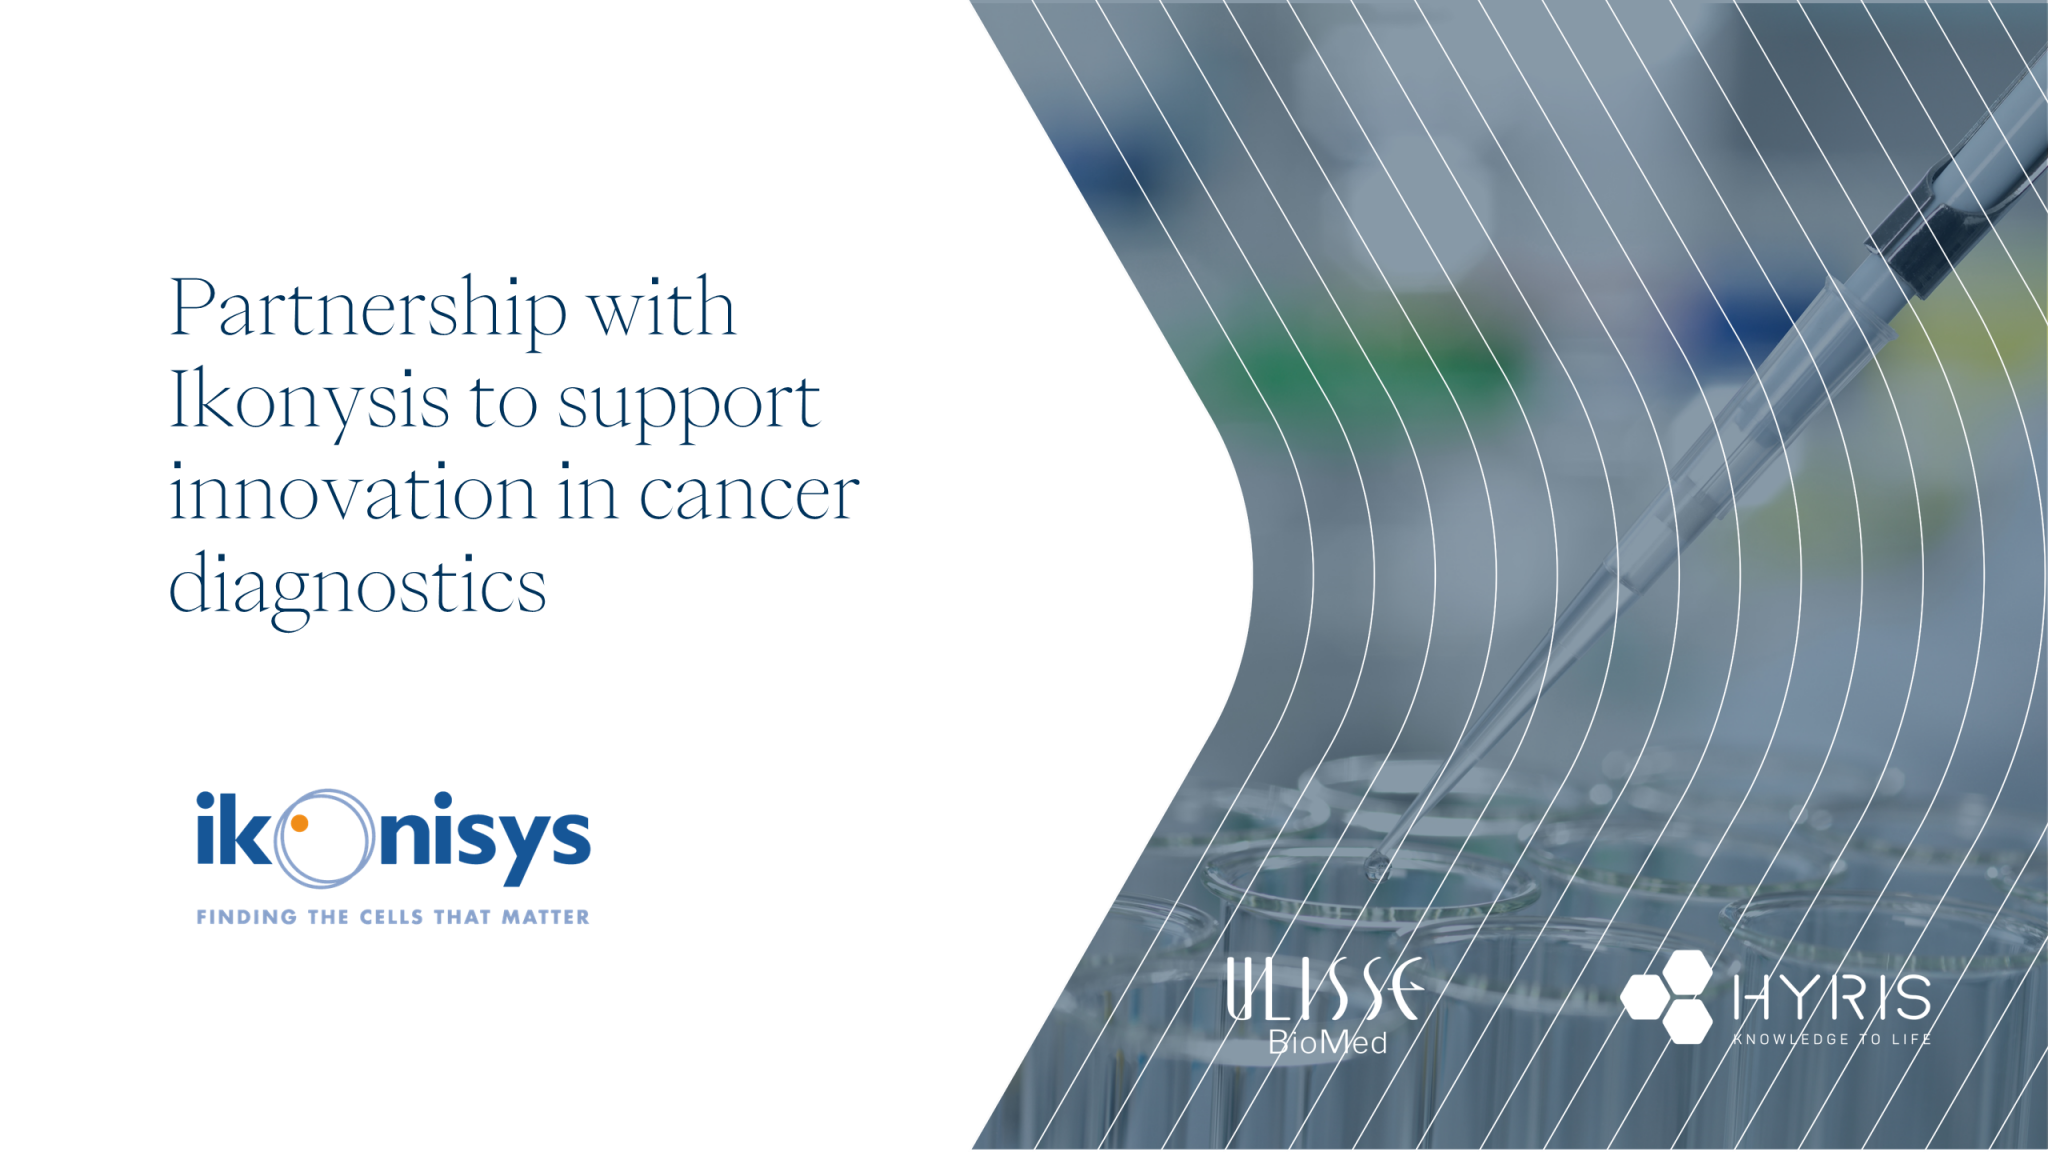 Ulisse Biomed and Ikonisys Announce Strategic Partnership to Support Innovation in Cancer Diagnostics